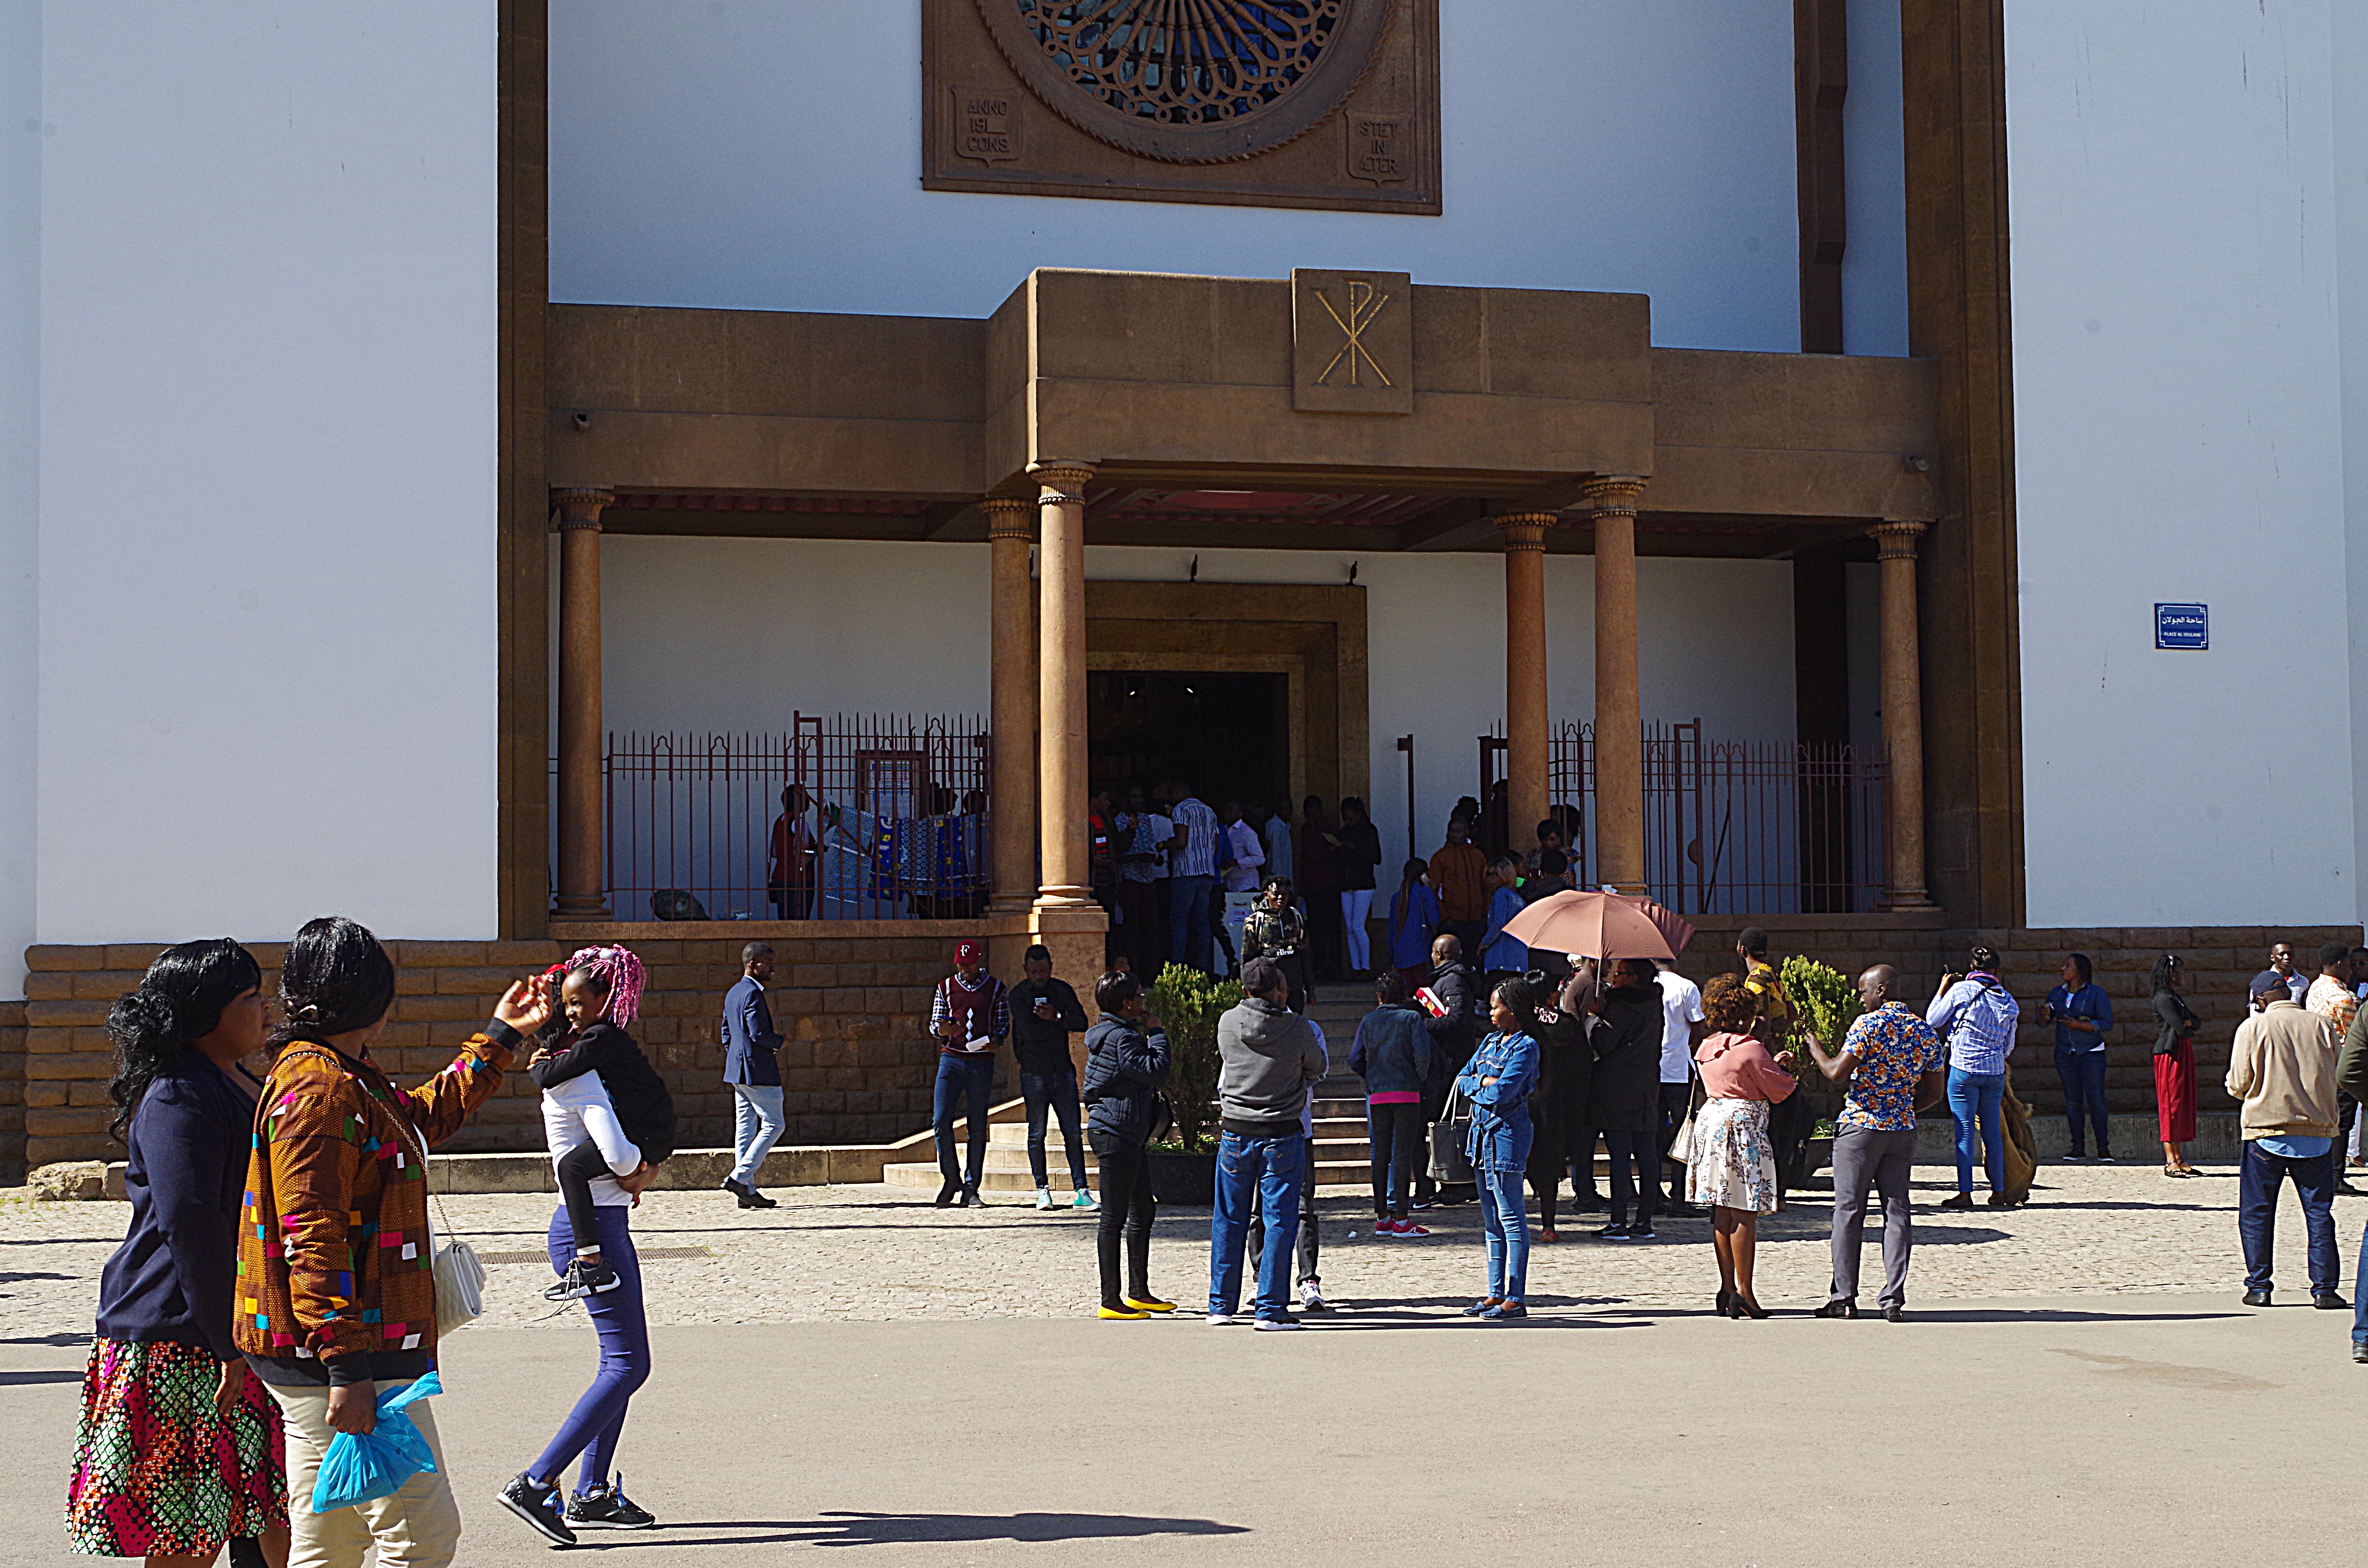 Migrants outside the Catholic Cathedral of St Peter in Rabat (photo: Claudia Mende)